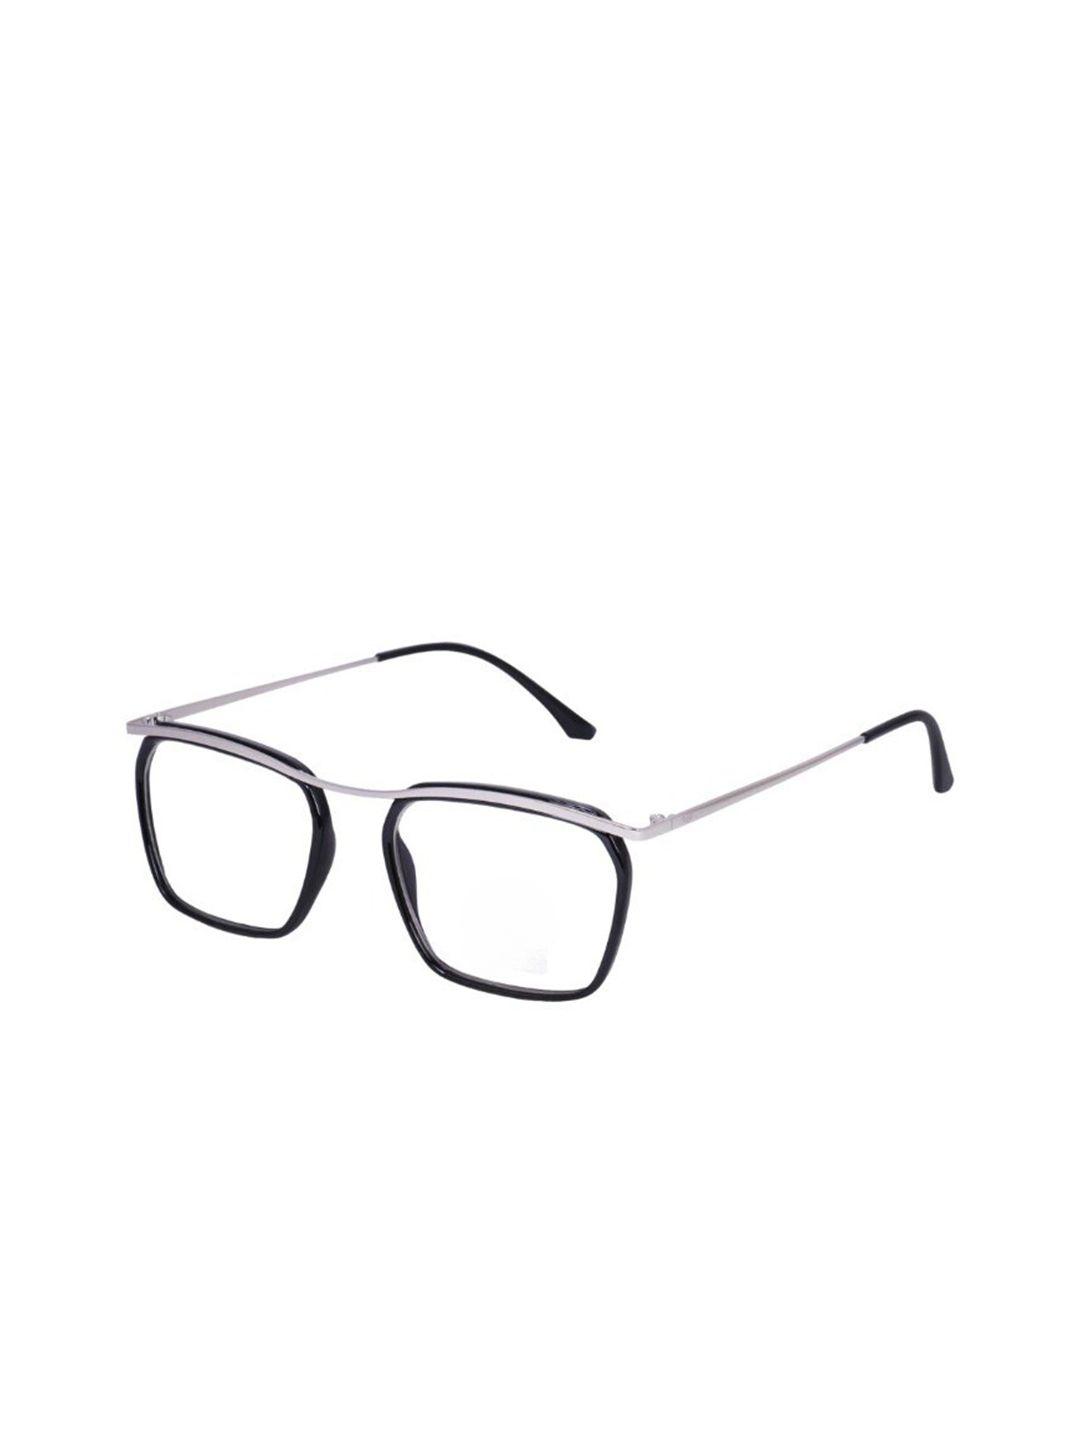 optify unisex clear lens & silver-toned square sunglasses with uv protected lens